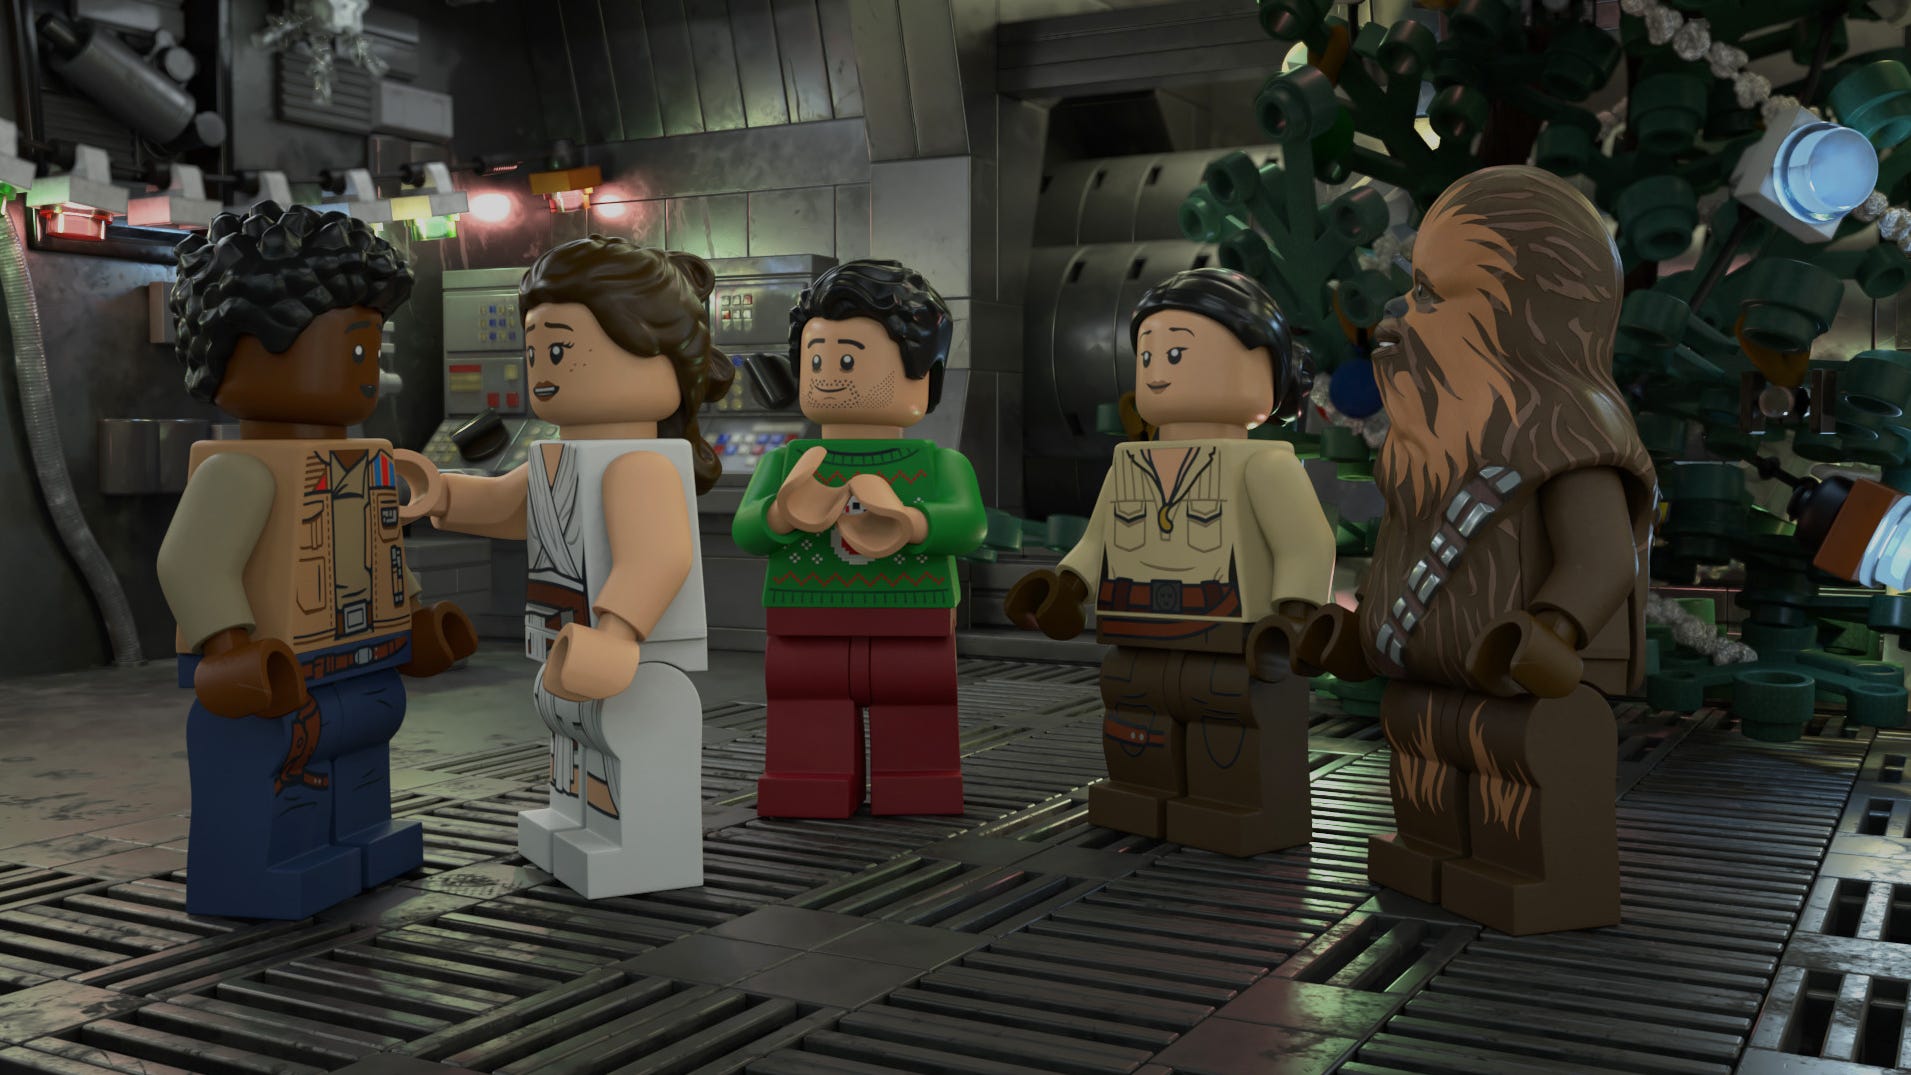 'Star Wars' exclusive: New Disney+ Lego holiday special pays homage to its kitschy 1978 predecessor - USA TODAY